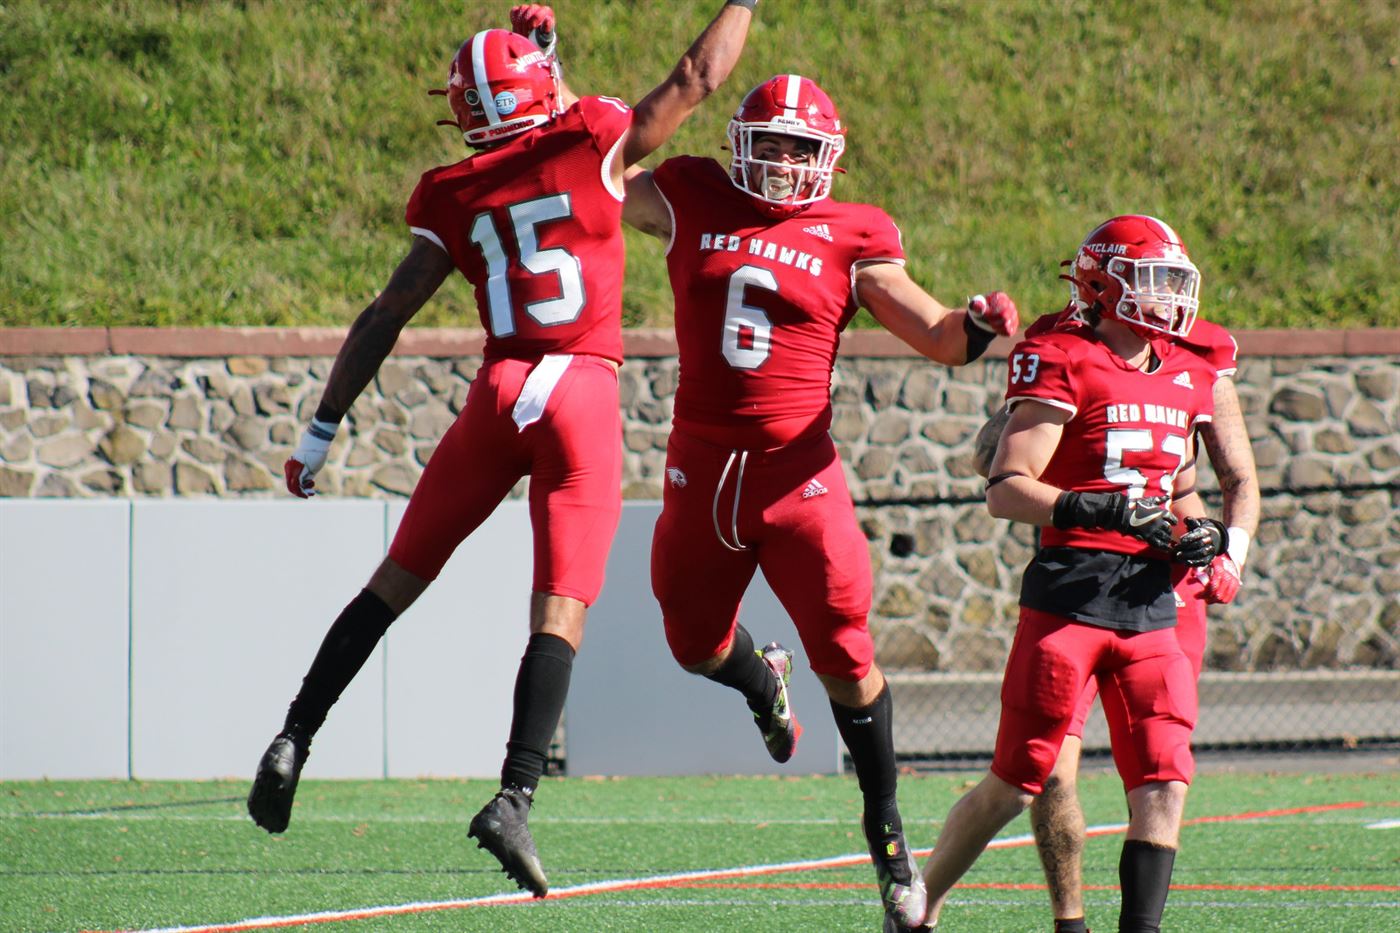 Dimitri Pali celebrates a sack, which attempted to revitalize the Red Hawks in this game. Emily Sznurkowski | The Montclarion